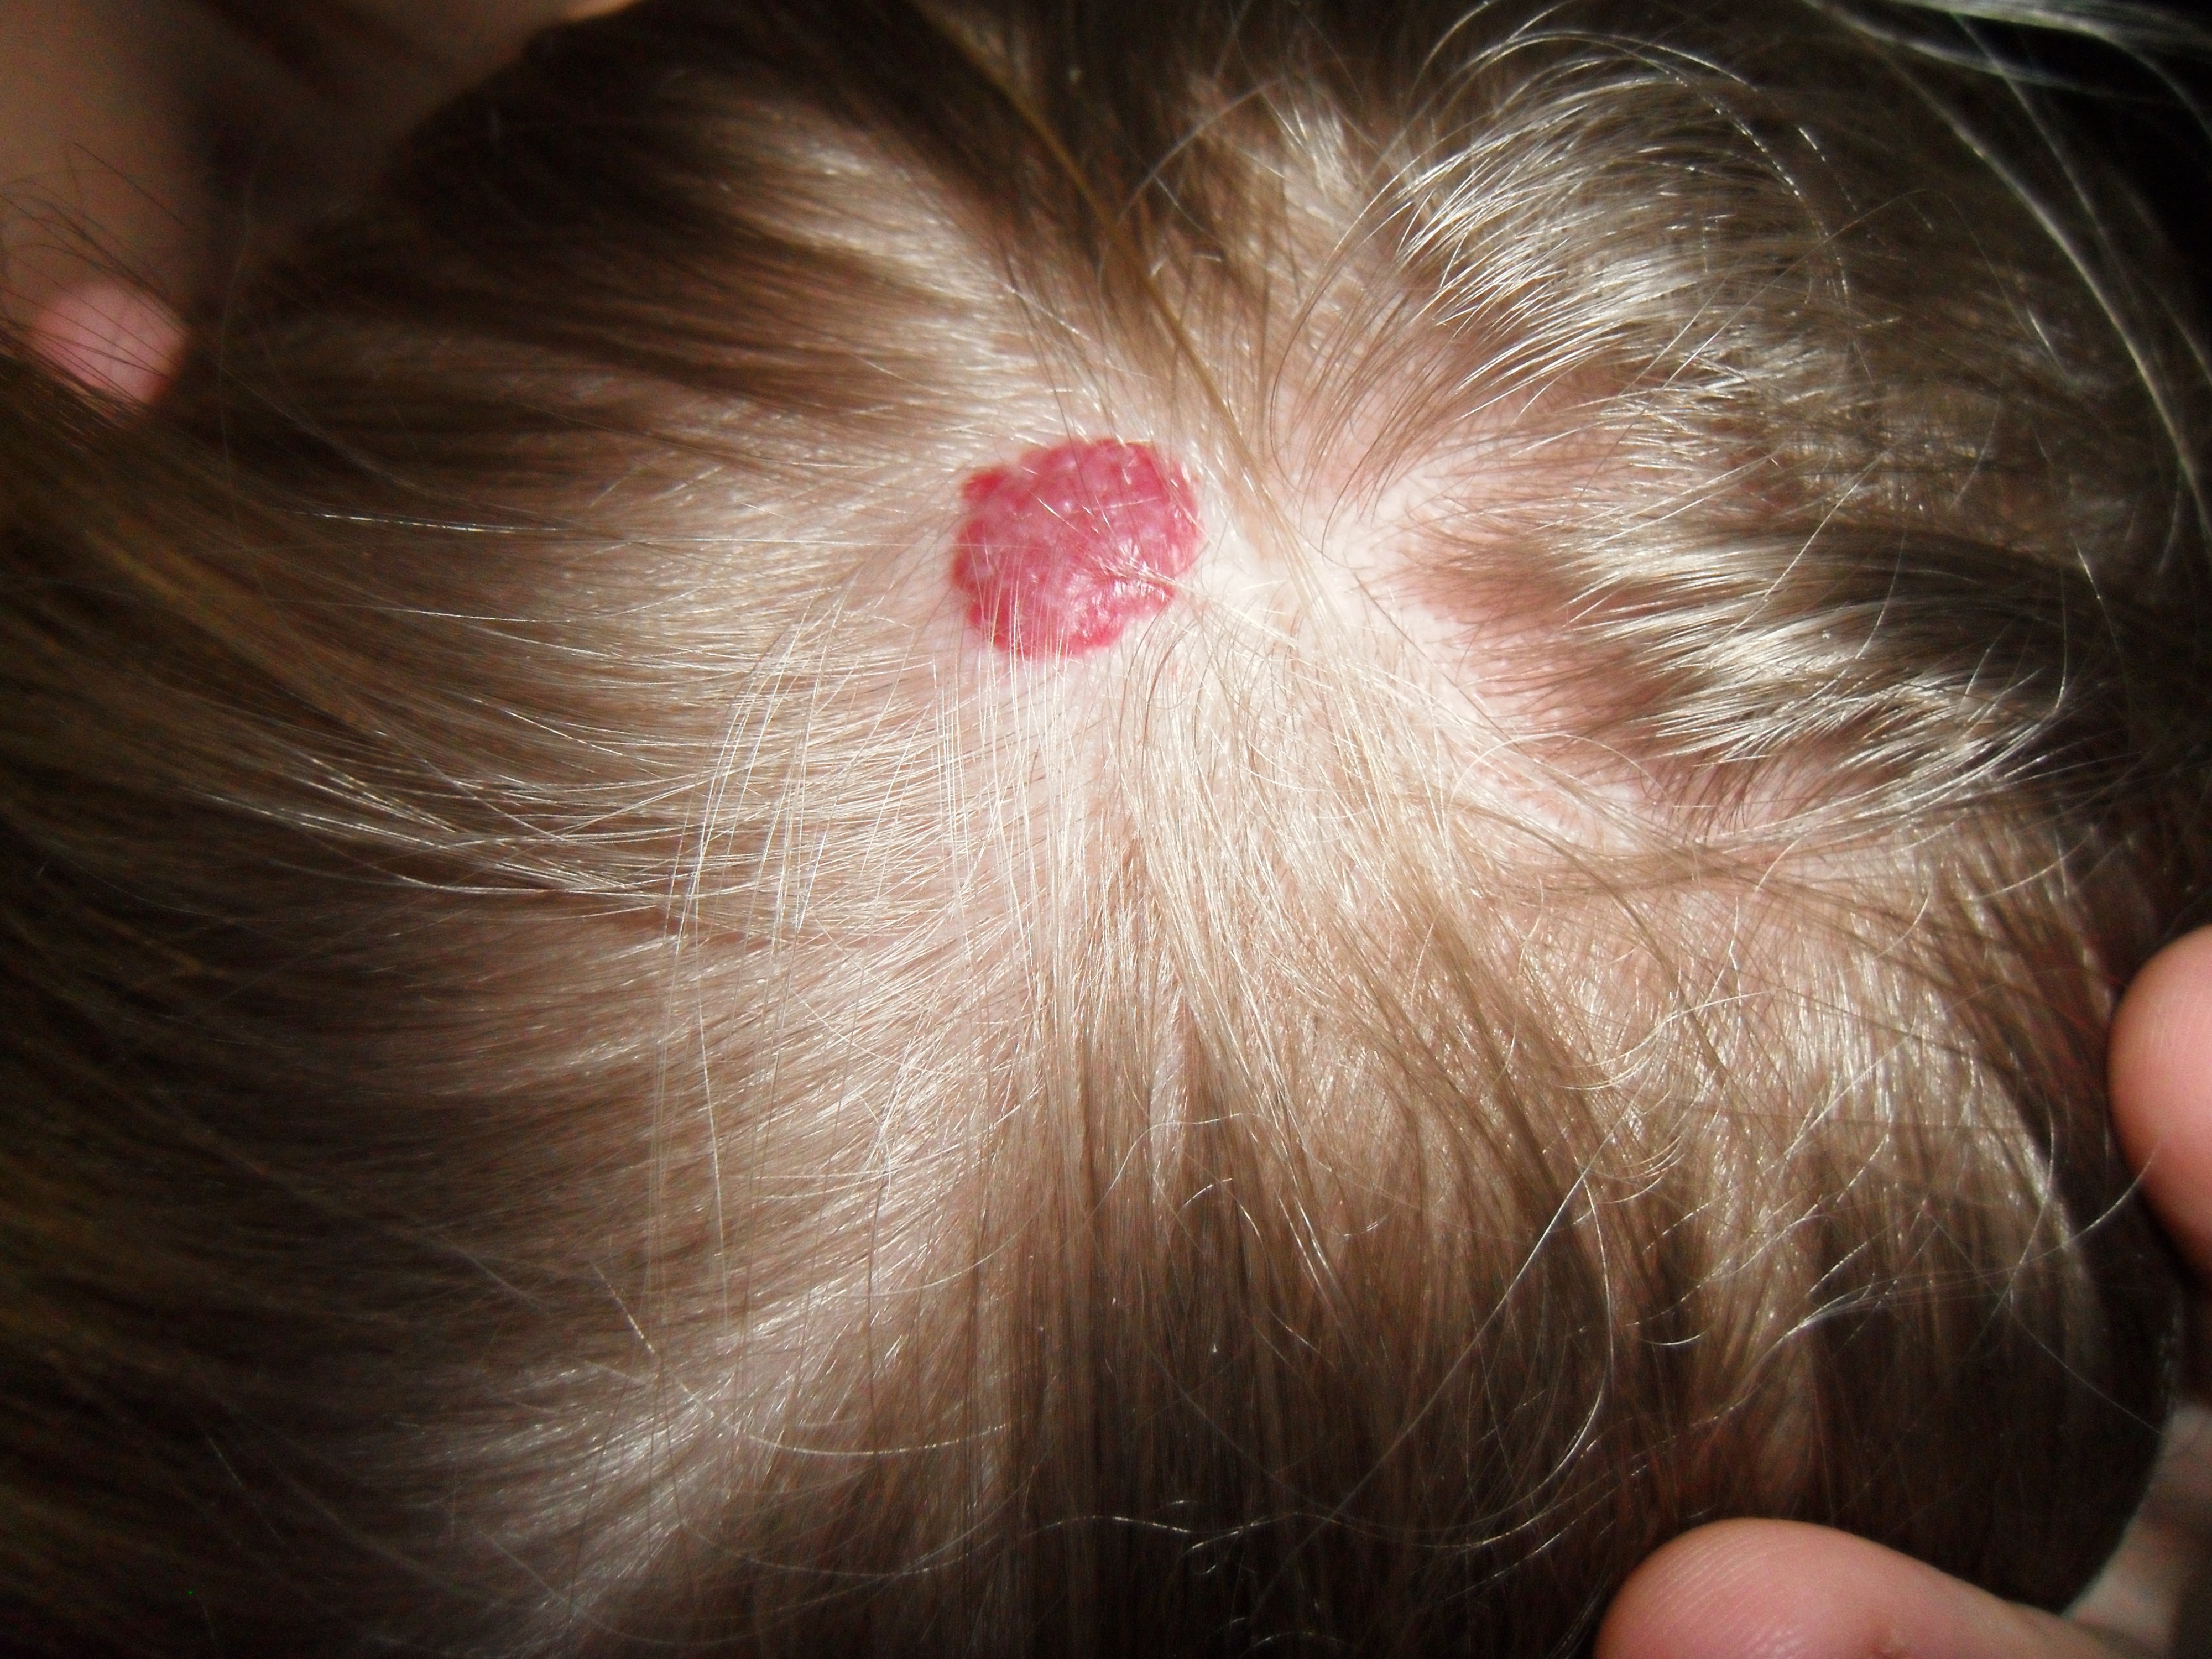 MIF Forums • Pink/reddish mole on scalp? - NeonCRM